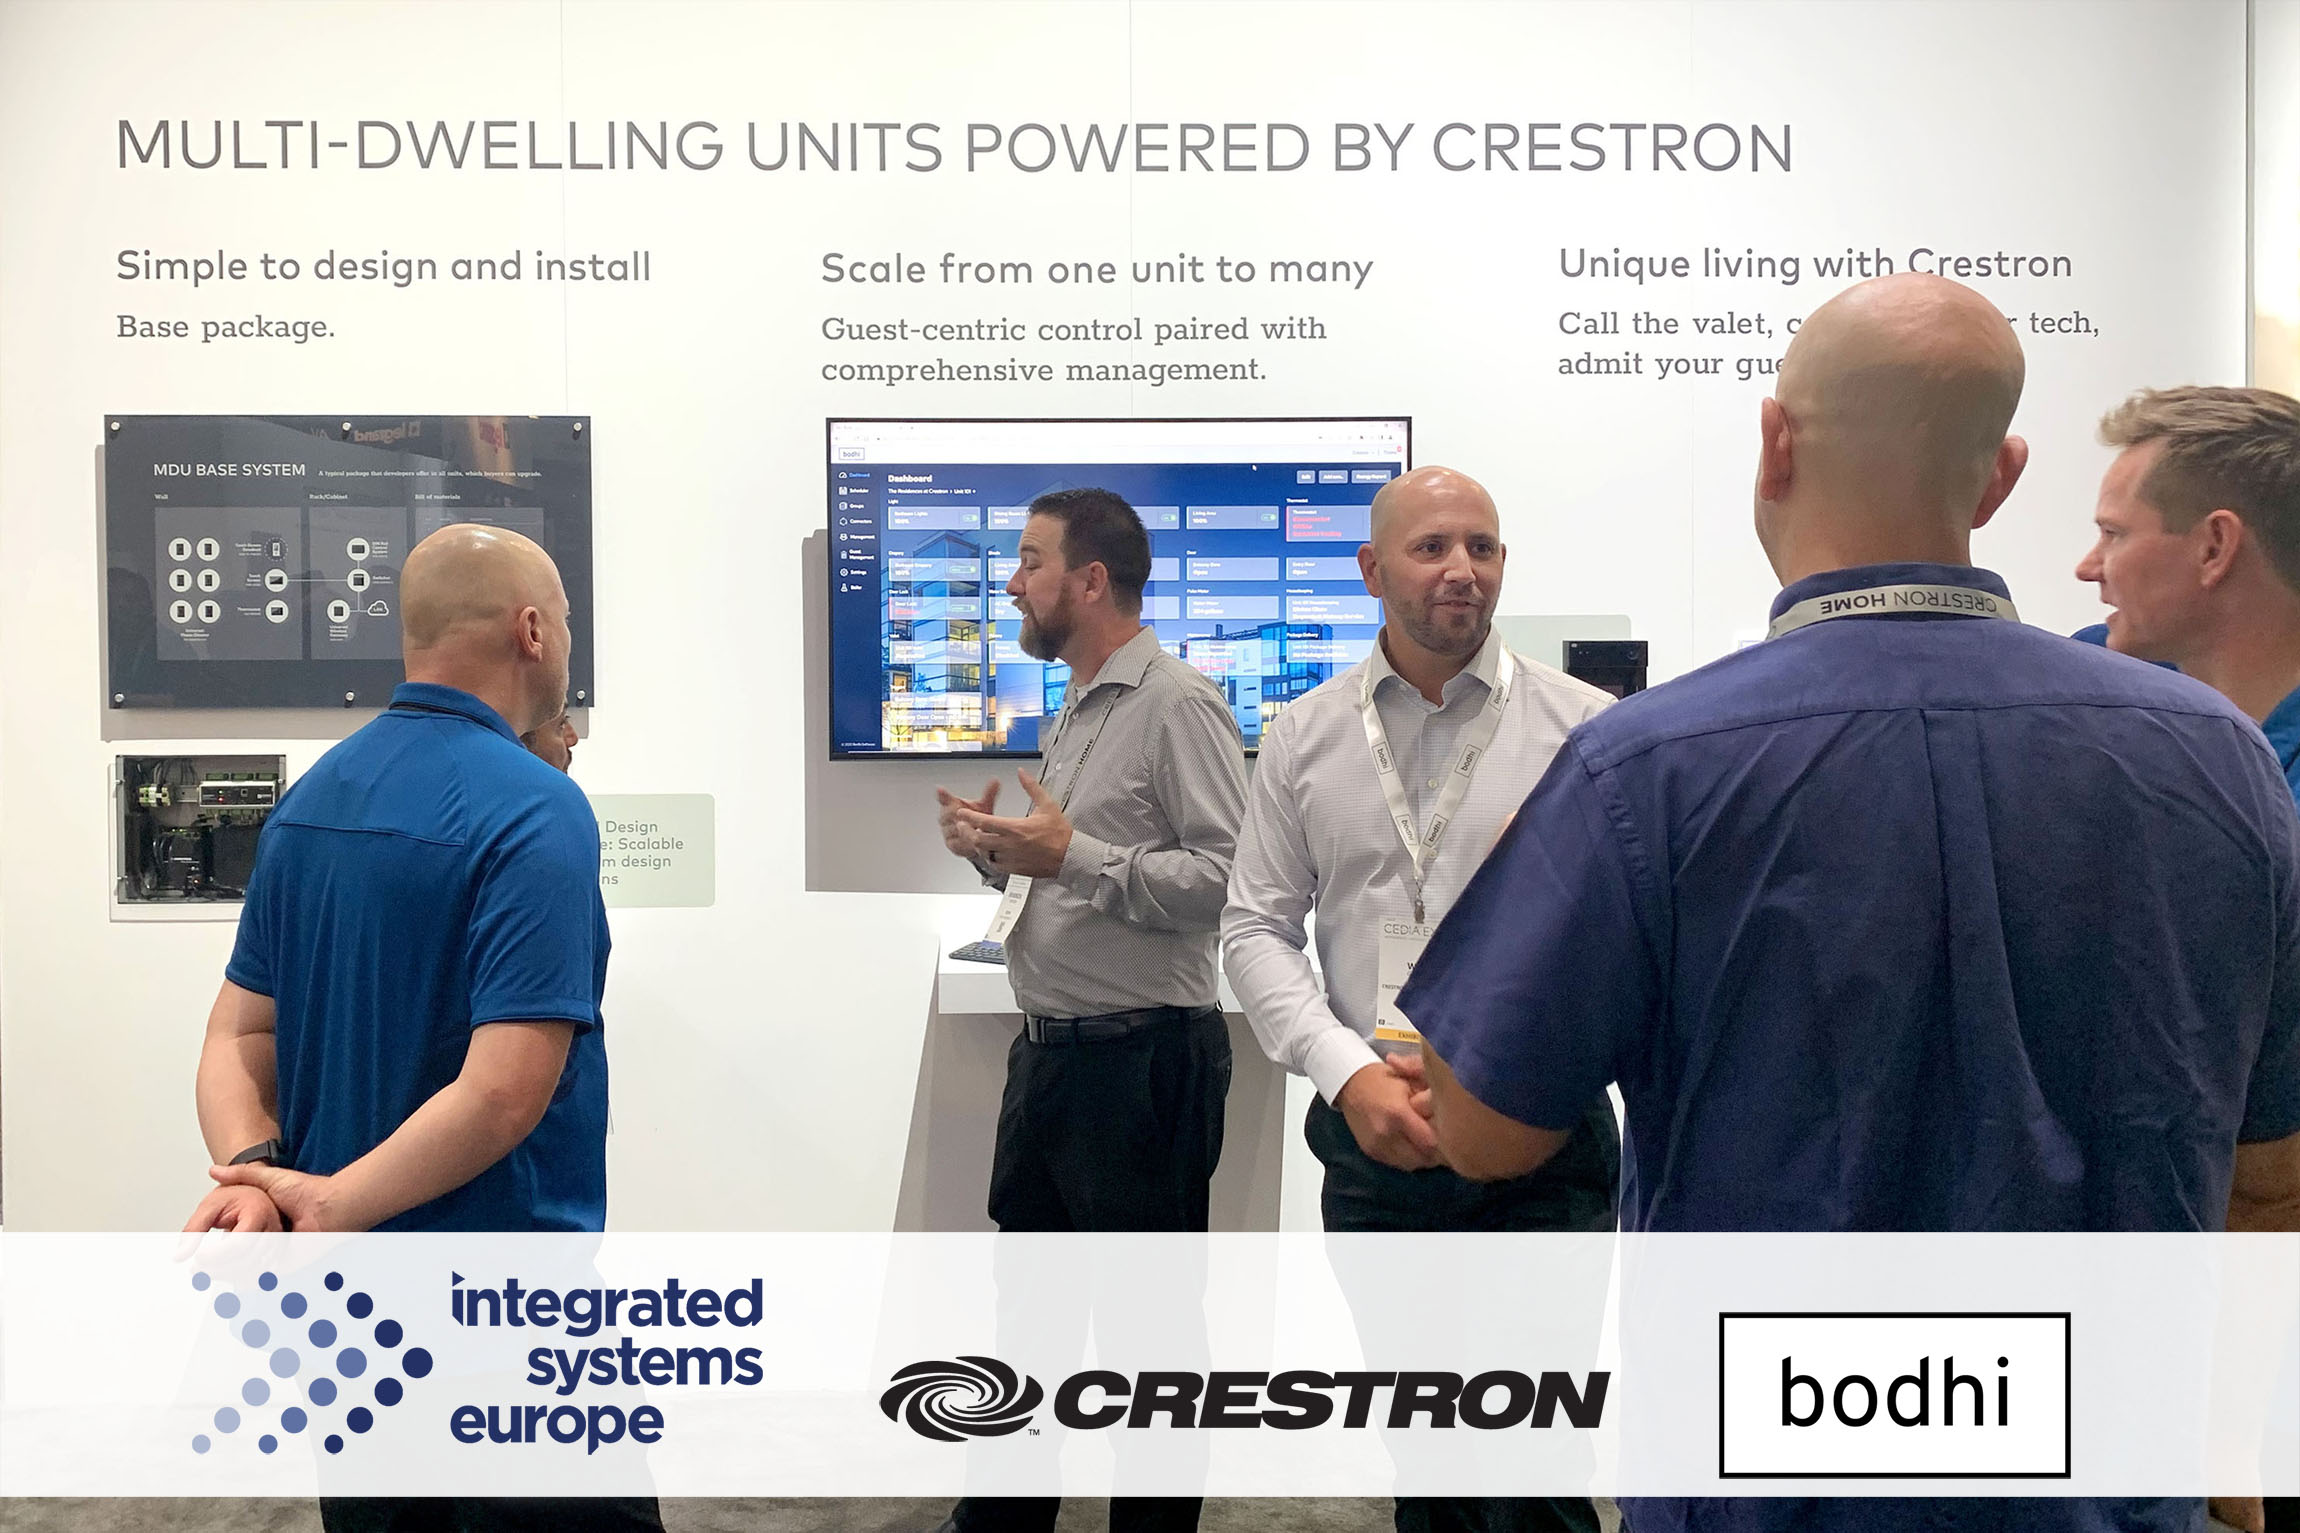 Crestron will feature Bodhi in the MDU and hospitality sections of their booth at ISE 2023.